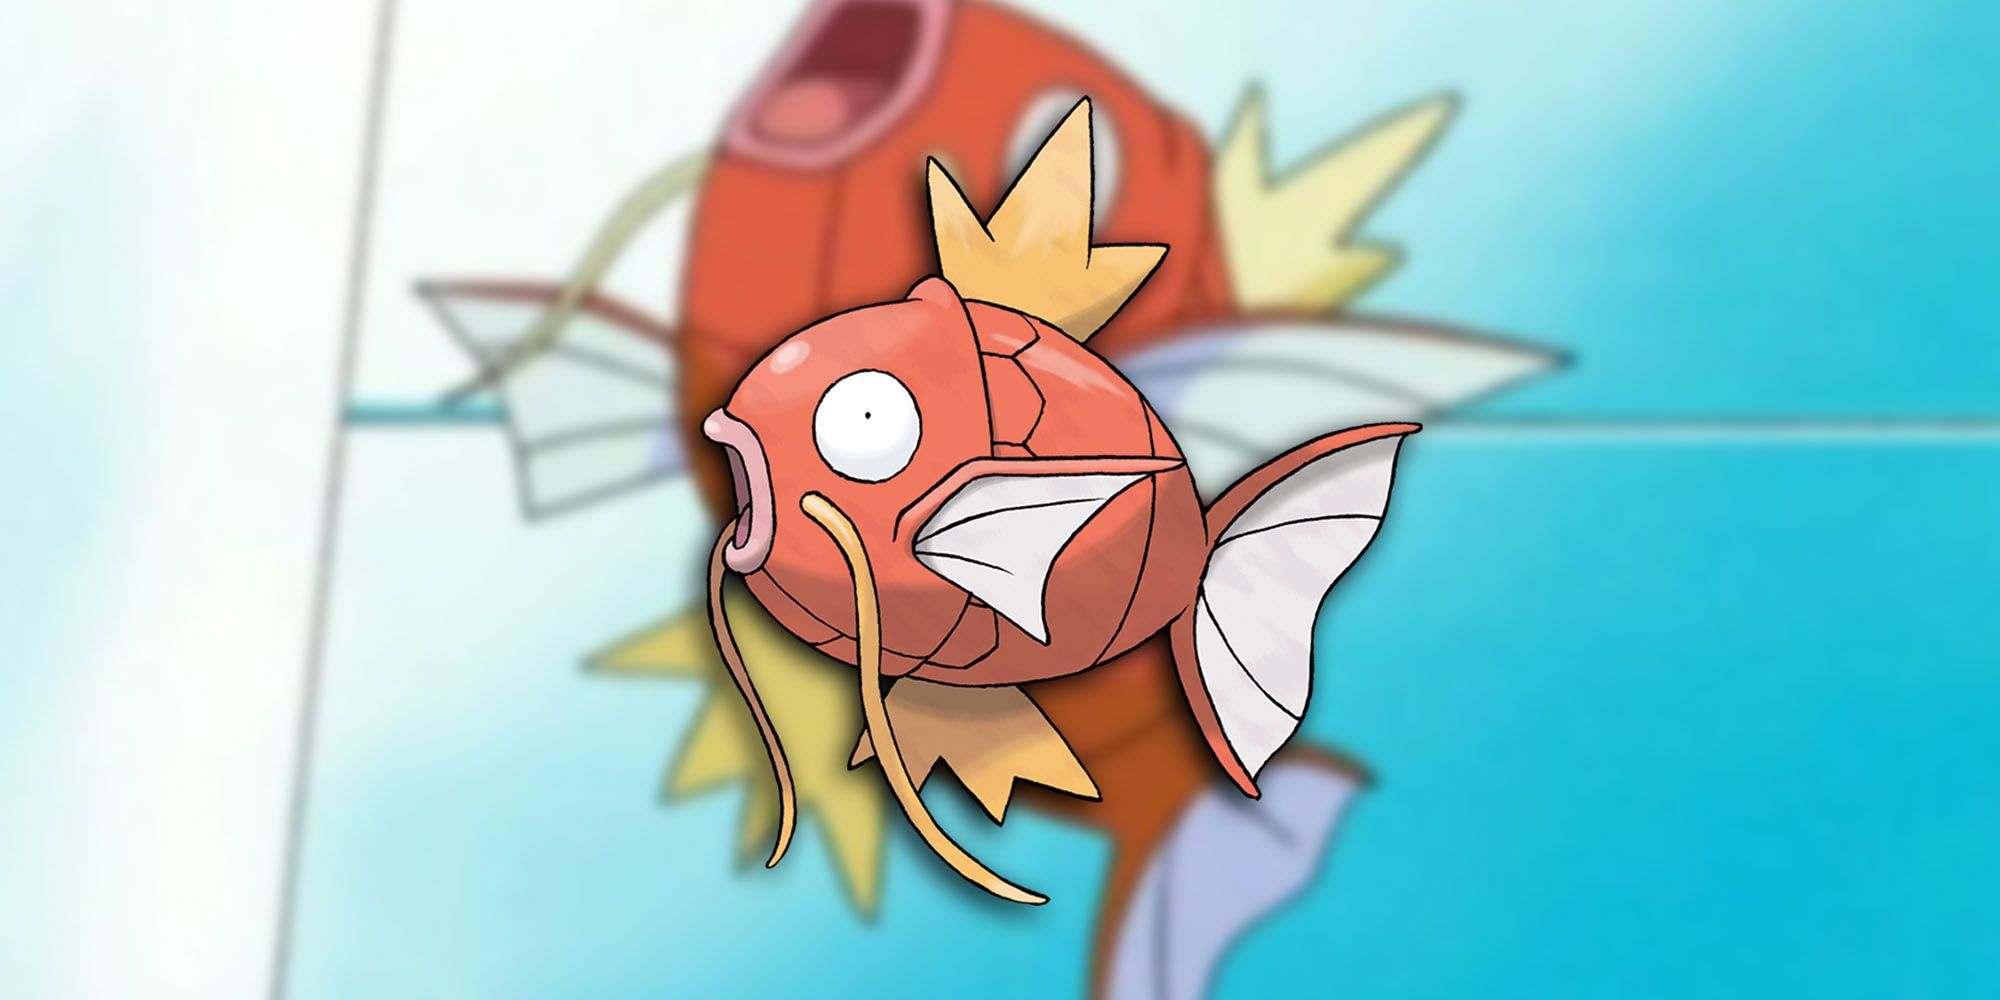 Pokemon - Magikarp As Seen In The Anime With PNG Of Pokemon On Top